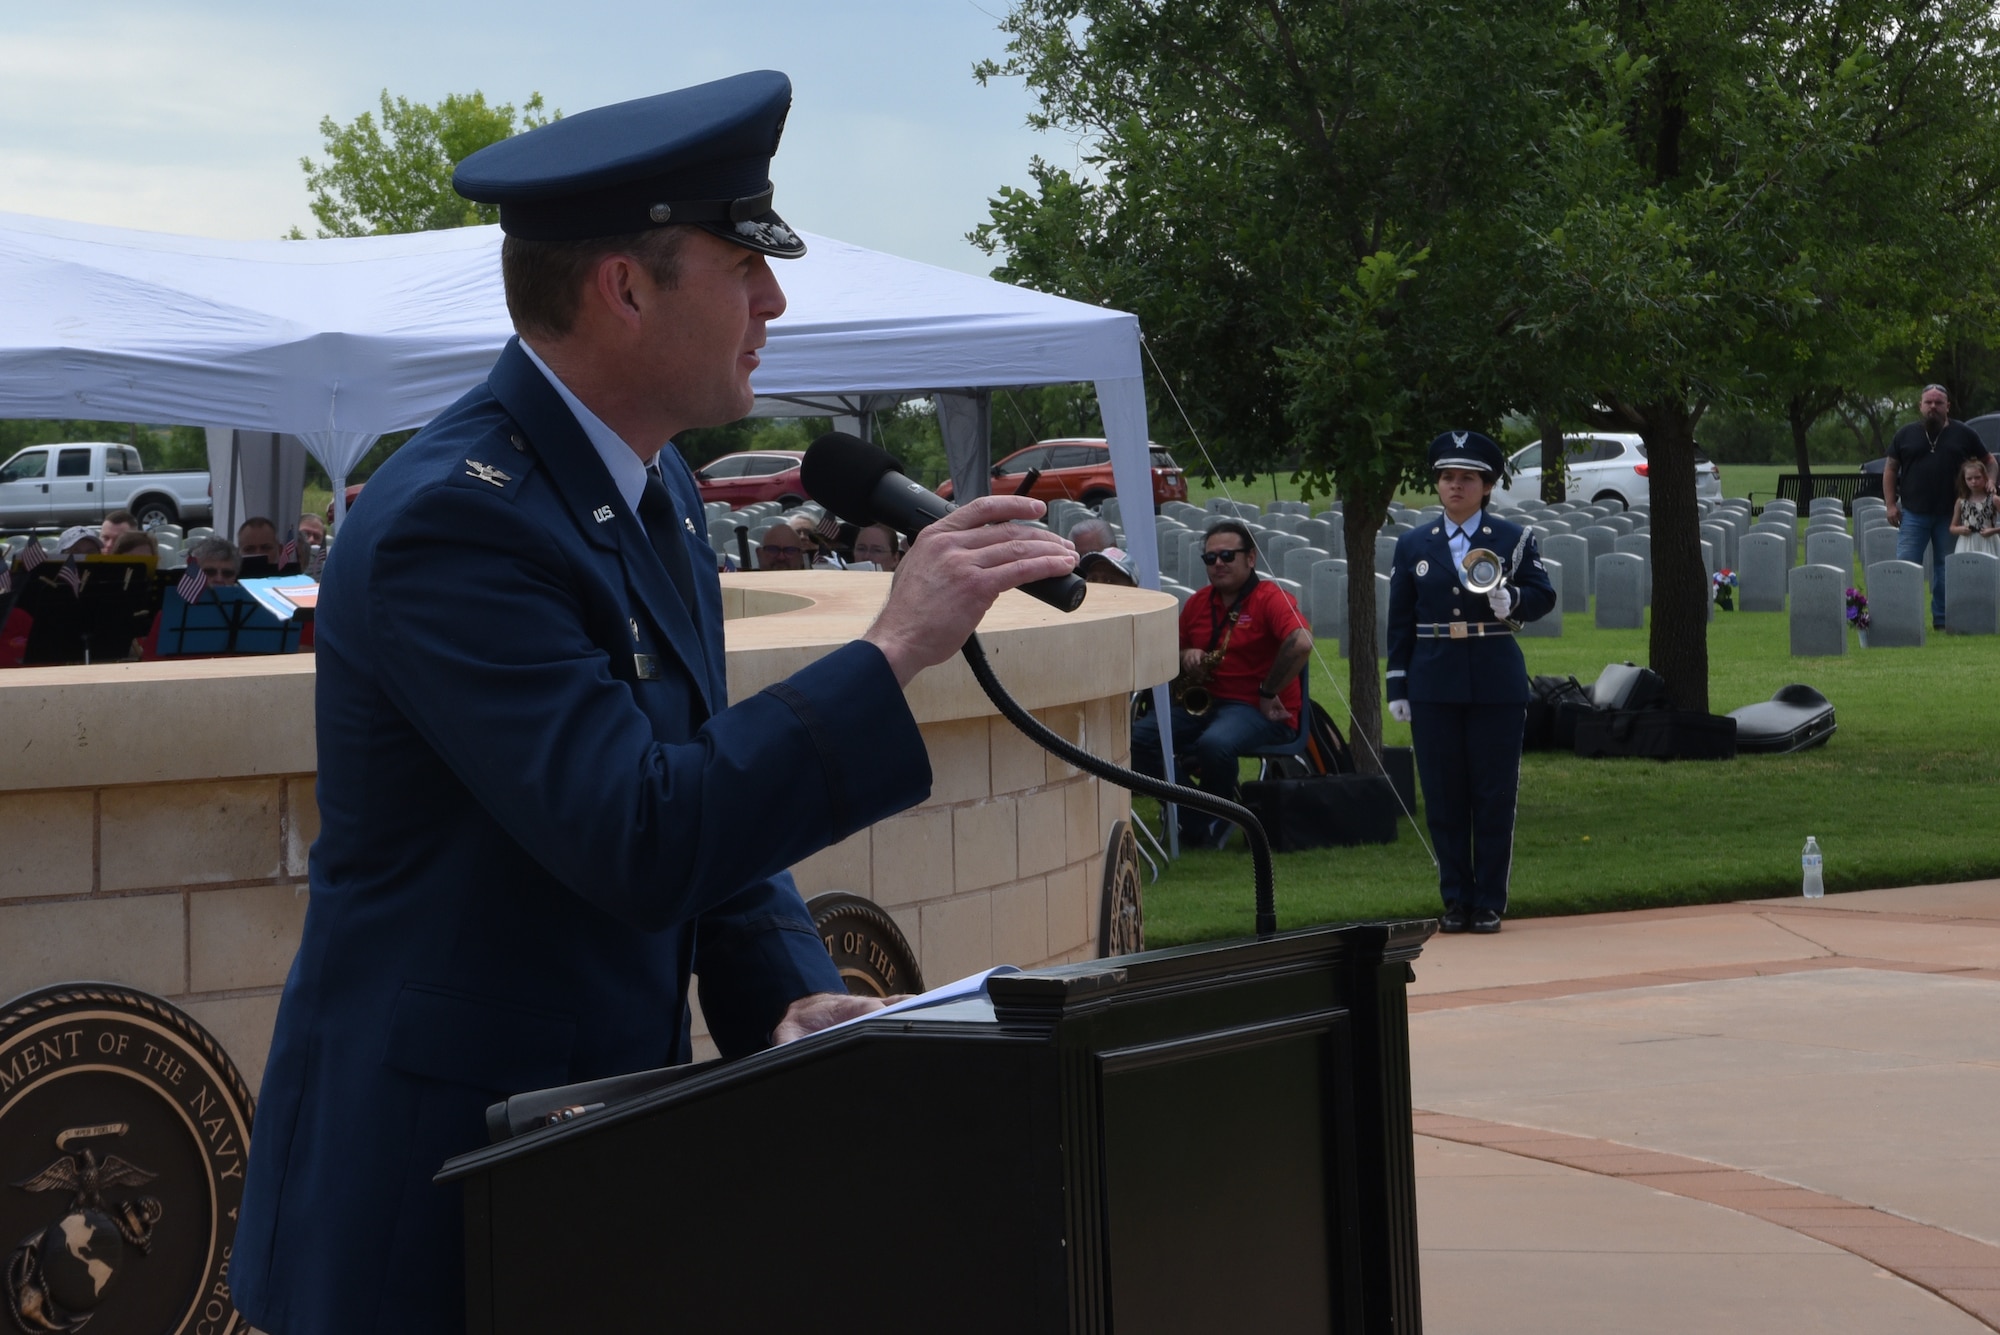 U.S. Air Force Col. Joseph Kramer, 7th Bomb Wing commander, speaks during the Memorial Day service at the Texas State Veterans Cemetery in Abilene, Texas, May 29, 2023. Memorial Day is a time to honor the ultimate sacrifice of the service members that gave their lives in defense of the United States. (U.S. Air Force photo by Senior Airman Sophia Robello)